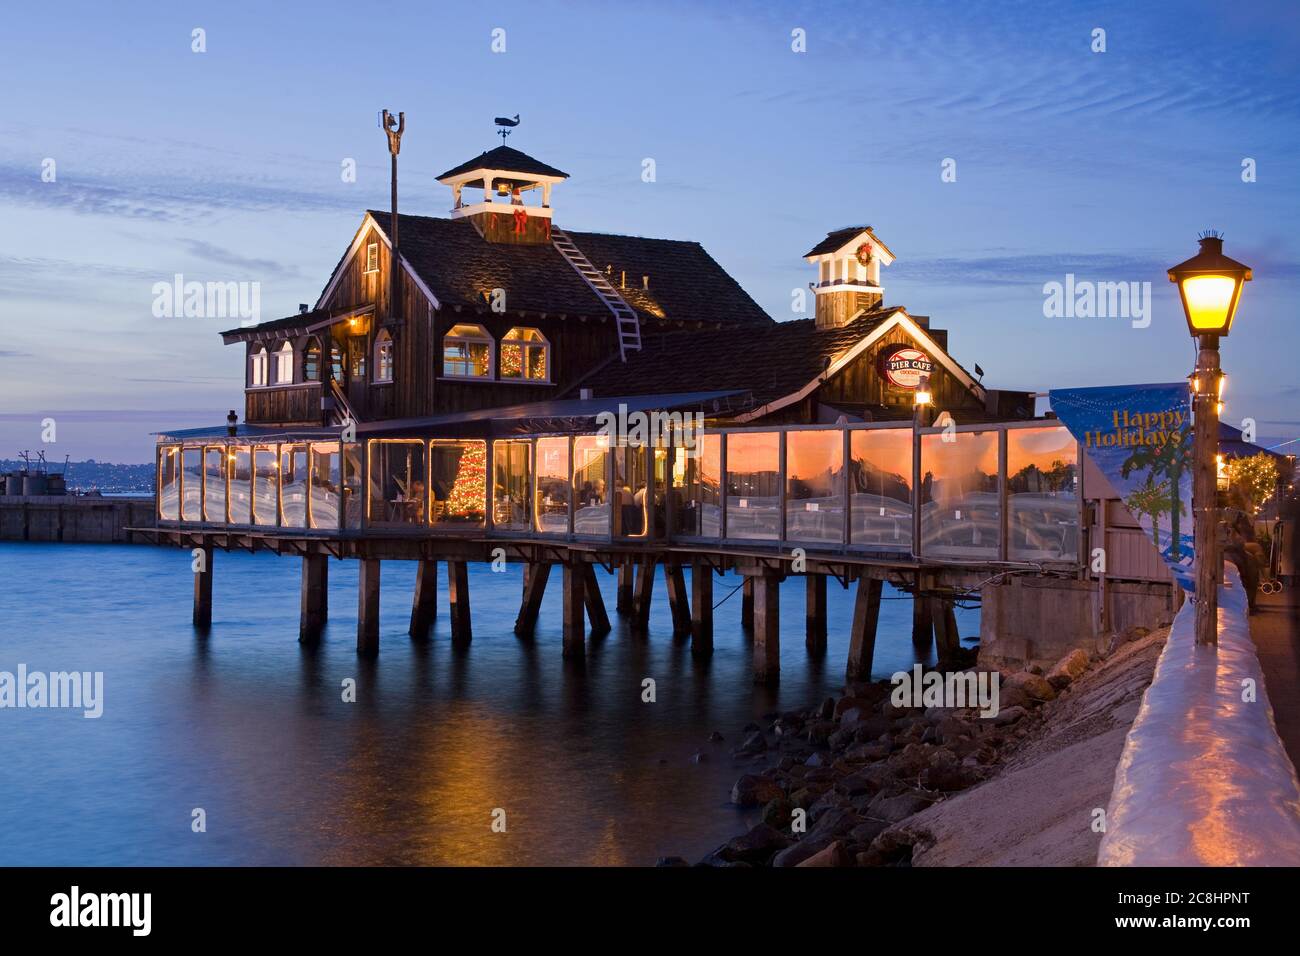 Pier Cafe in Seaport Village, San Diego, California, United States Stock Photo